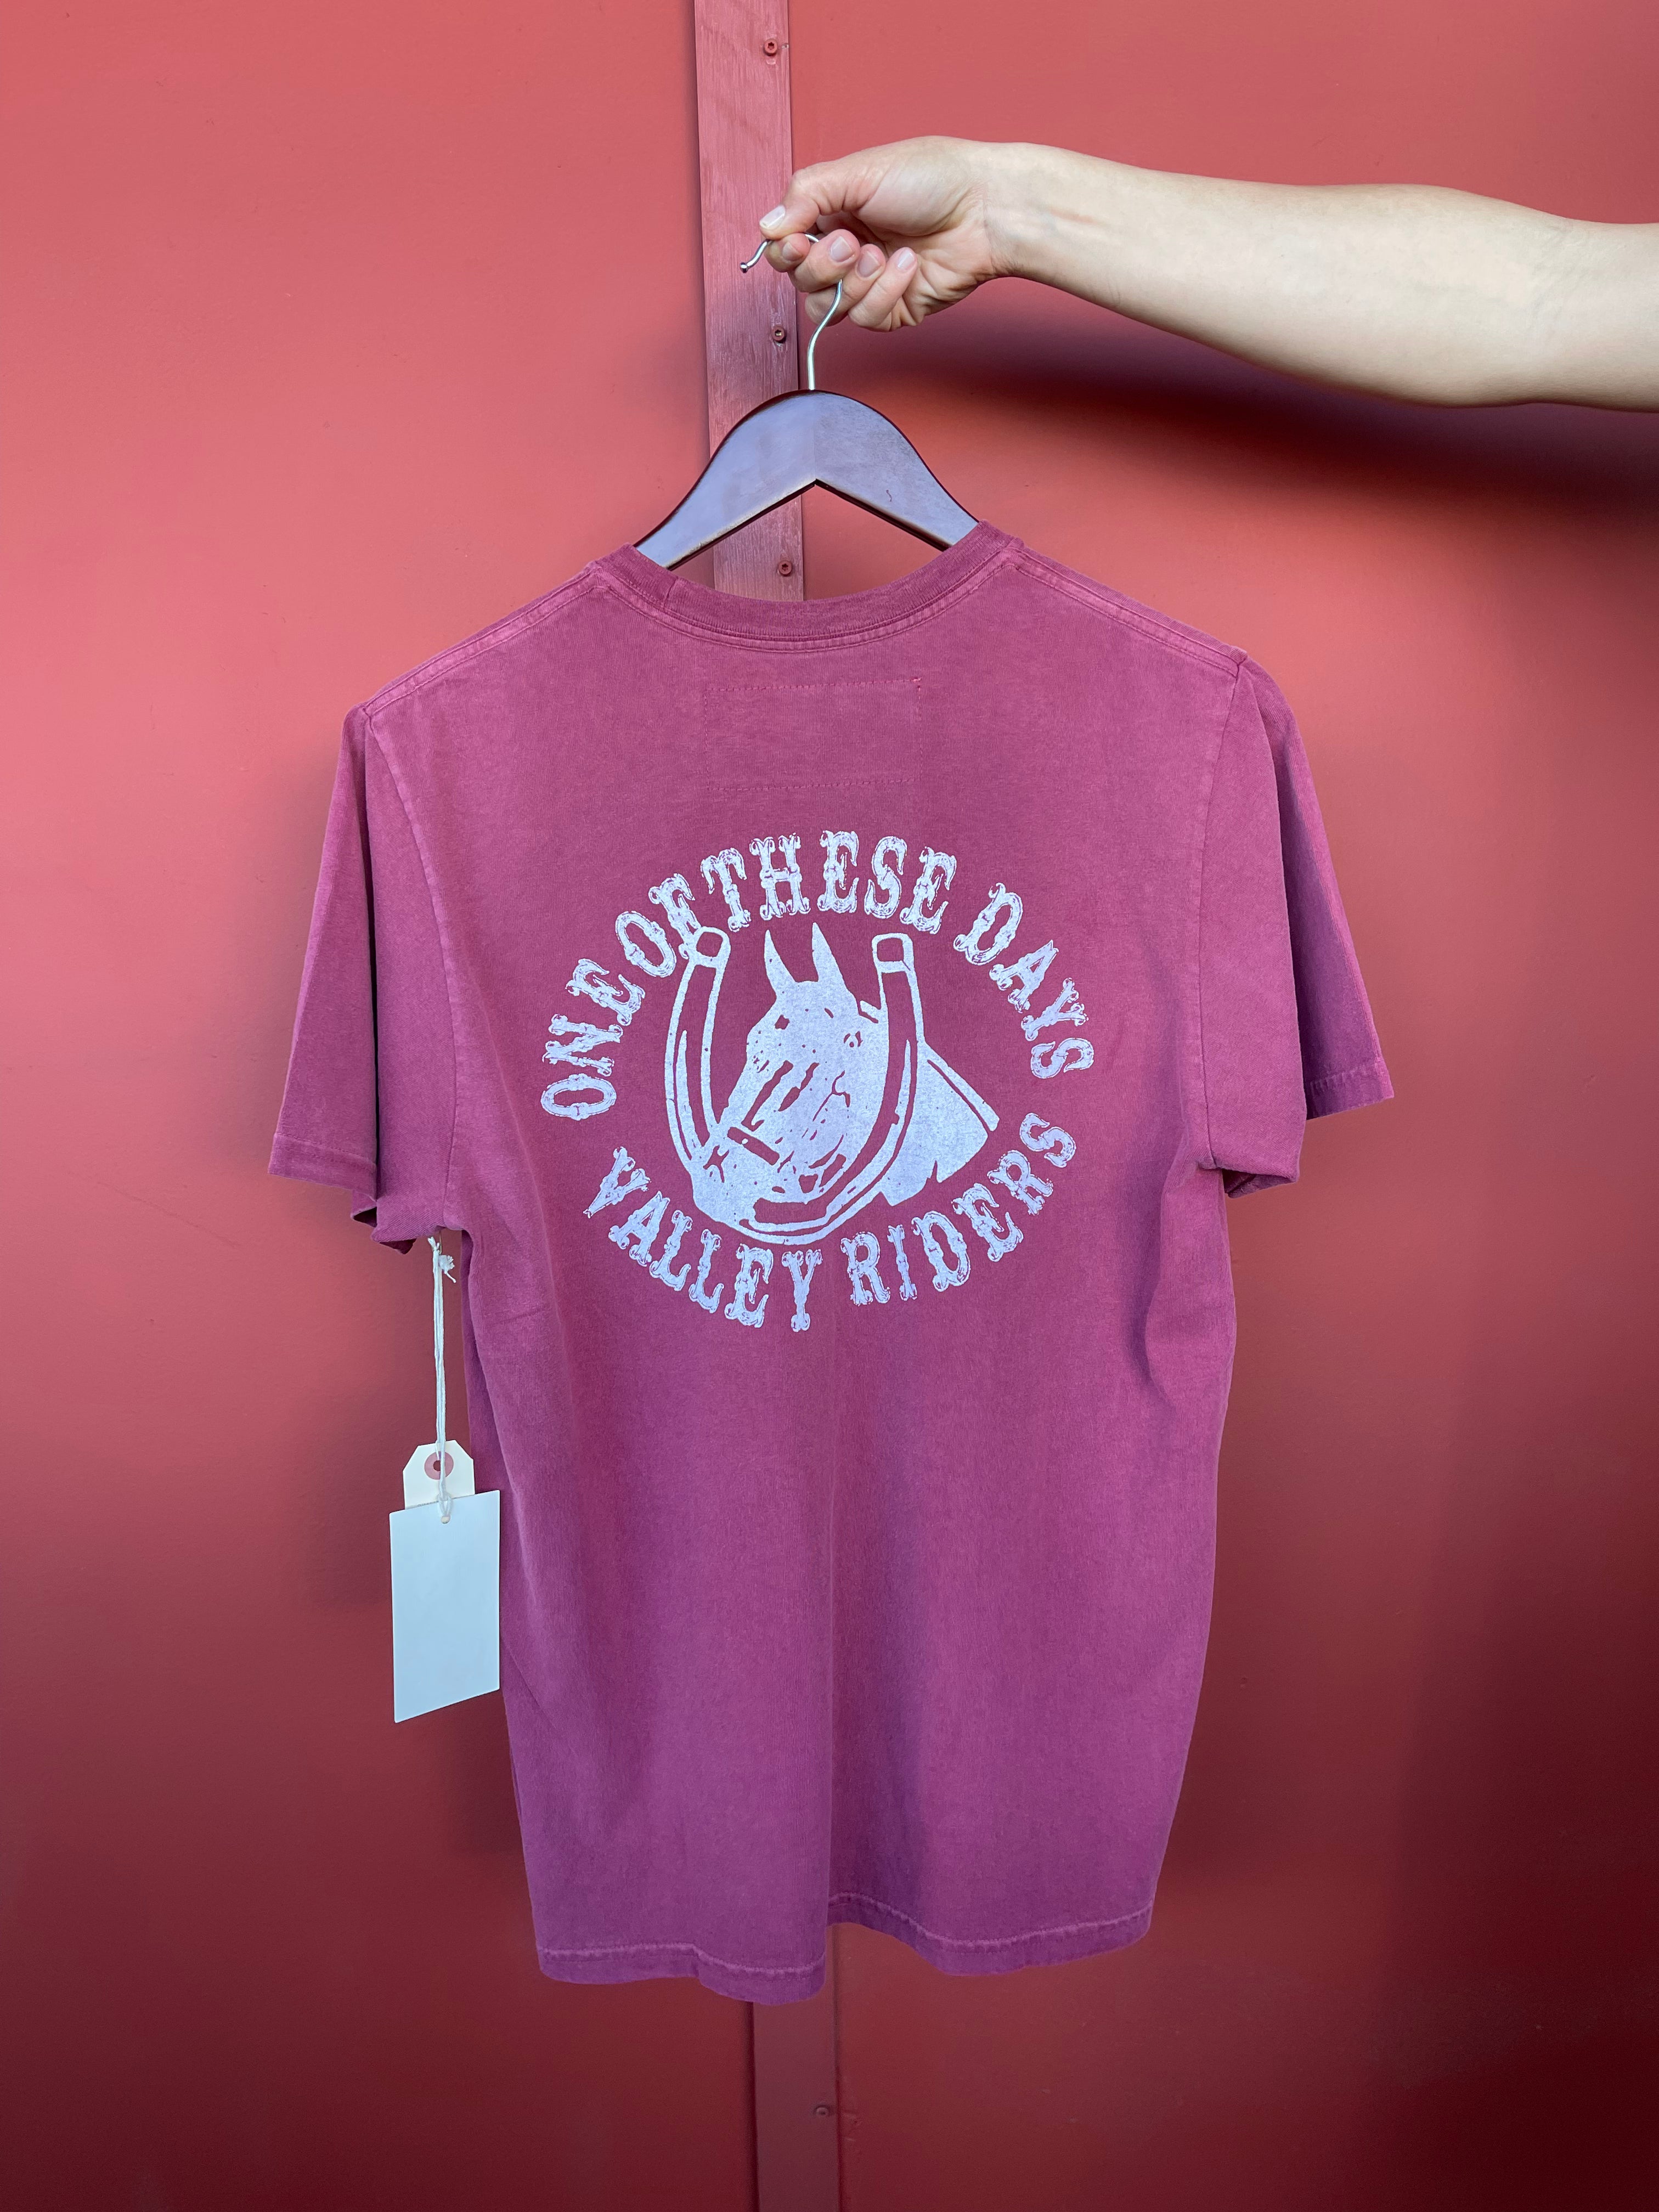 One of These Days - Valley Riders Tee Burgundy